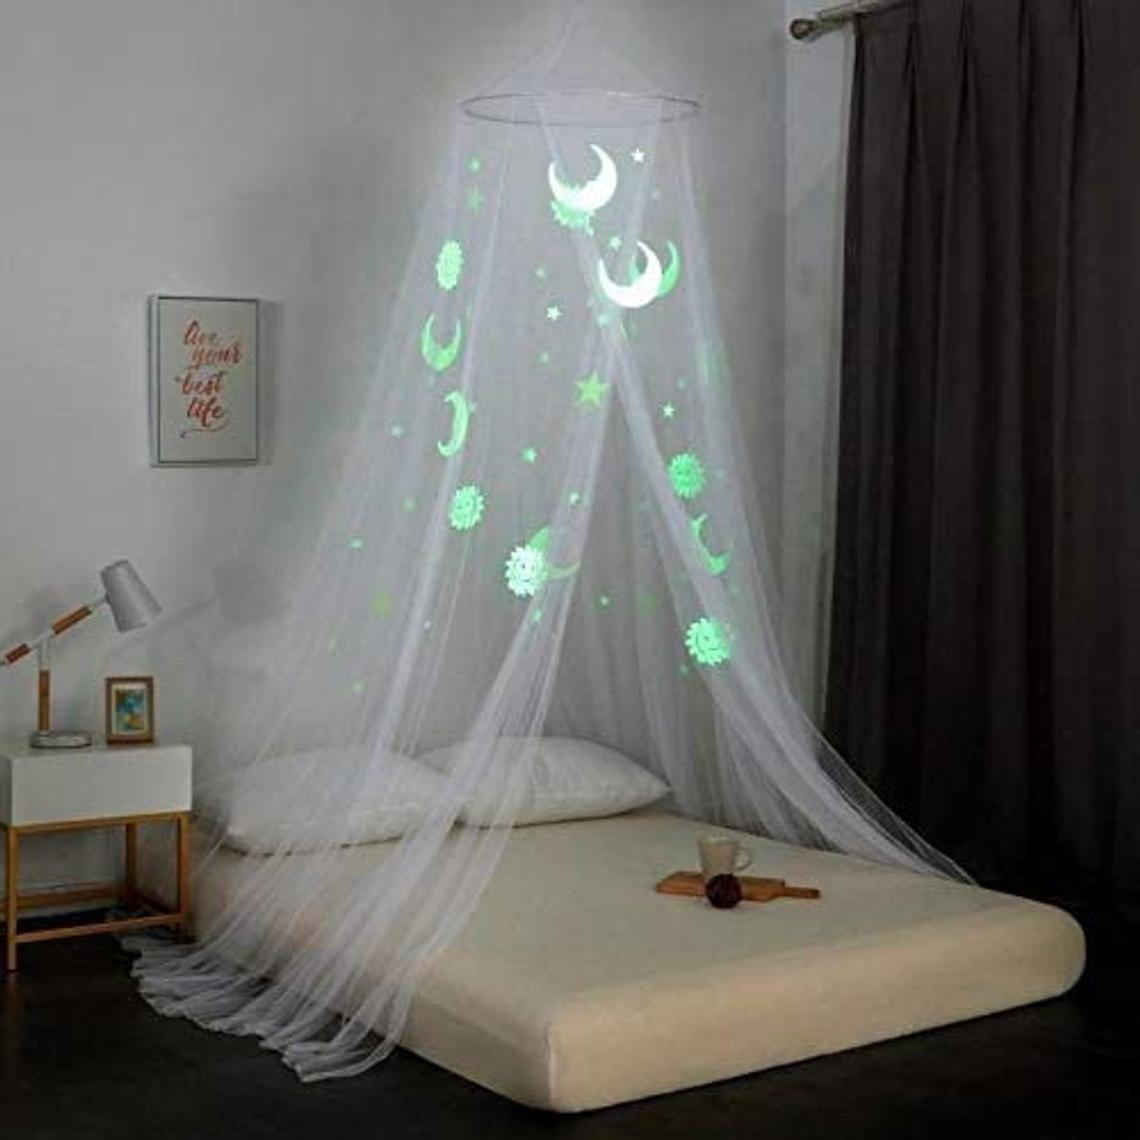 Fluorescent Stars Glow Bed Canopy Netting Curtain Dome Full Size Mosquito Net 